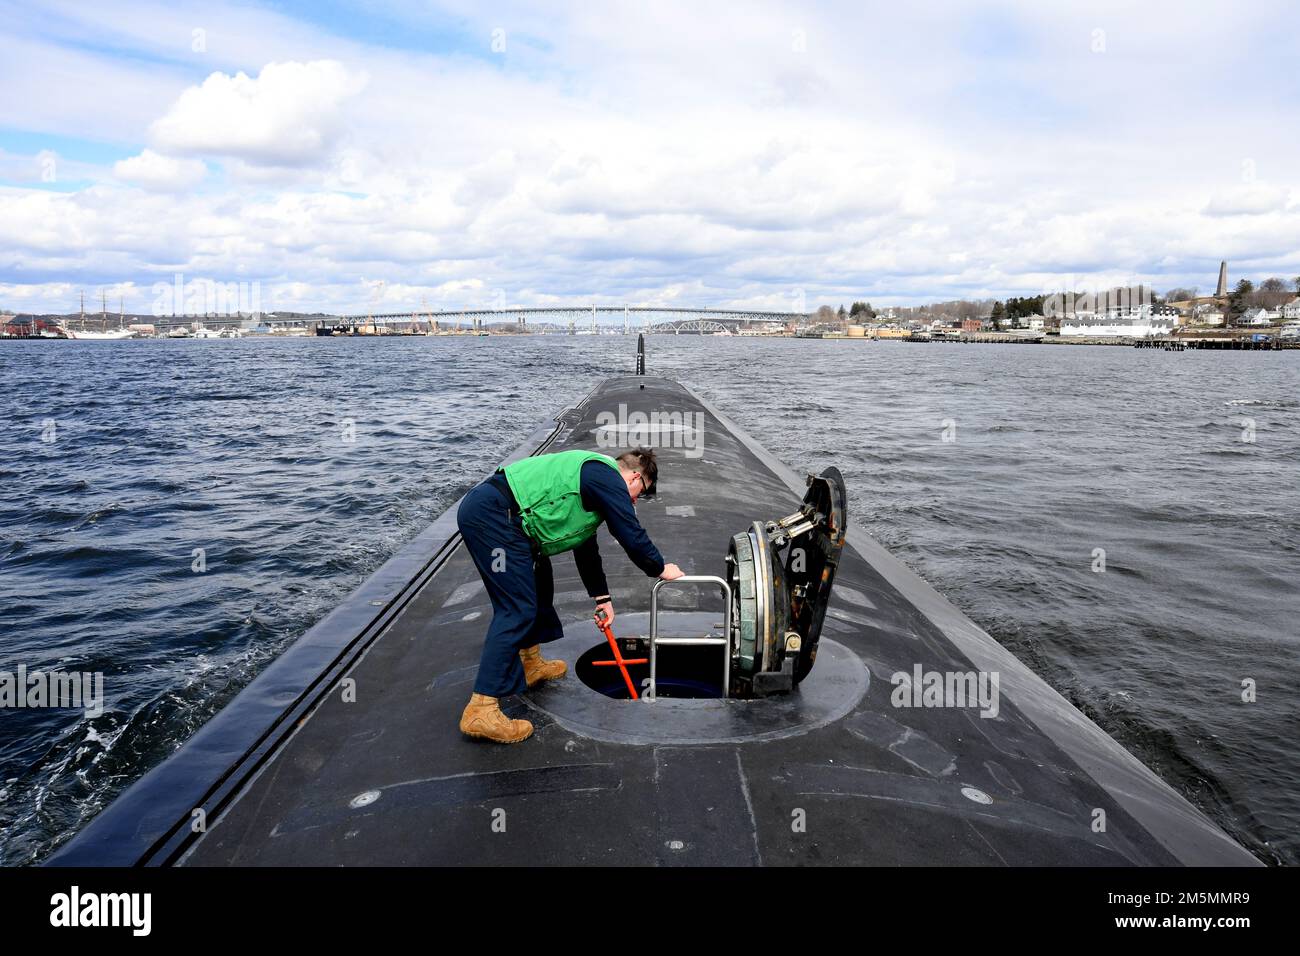 220326-N-GR655-0155 GROTON, Connecticut (March 26, 2022) – Petty Officer 1st Class Nathan Matzenbacher, a sonar technician attached to the Virginia-class submarine USS Delaware (SSN 791), conducts underway preparations as the ship transits the Thames River March 26, 2022. Delaware’s 132-man crew transited to Wilmington, Delaware to participate in week-long commemoration events in honor of the boat’s commissioning ceremony that took place administratively April 2020 due to COVID restrictions at the time. Delaware, the seventh U.S Navy ship and first submarine named after the first U.S. state of Stock Photo